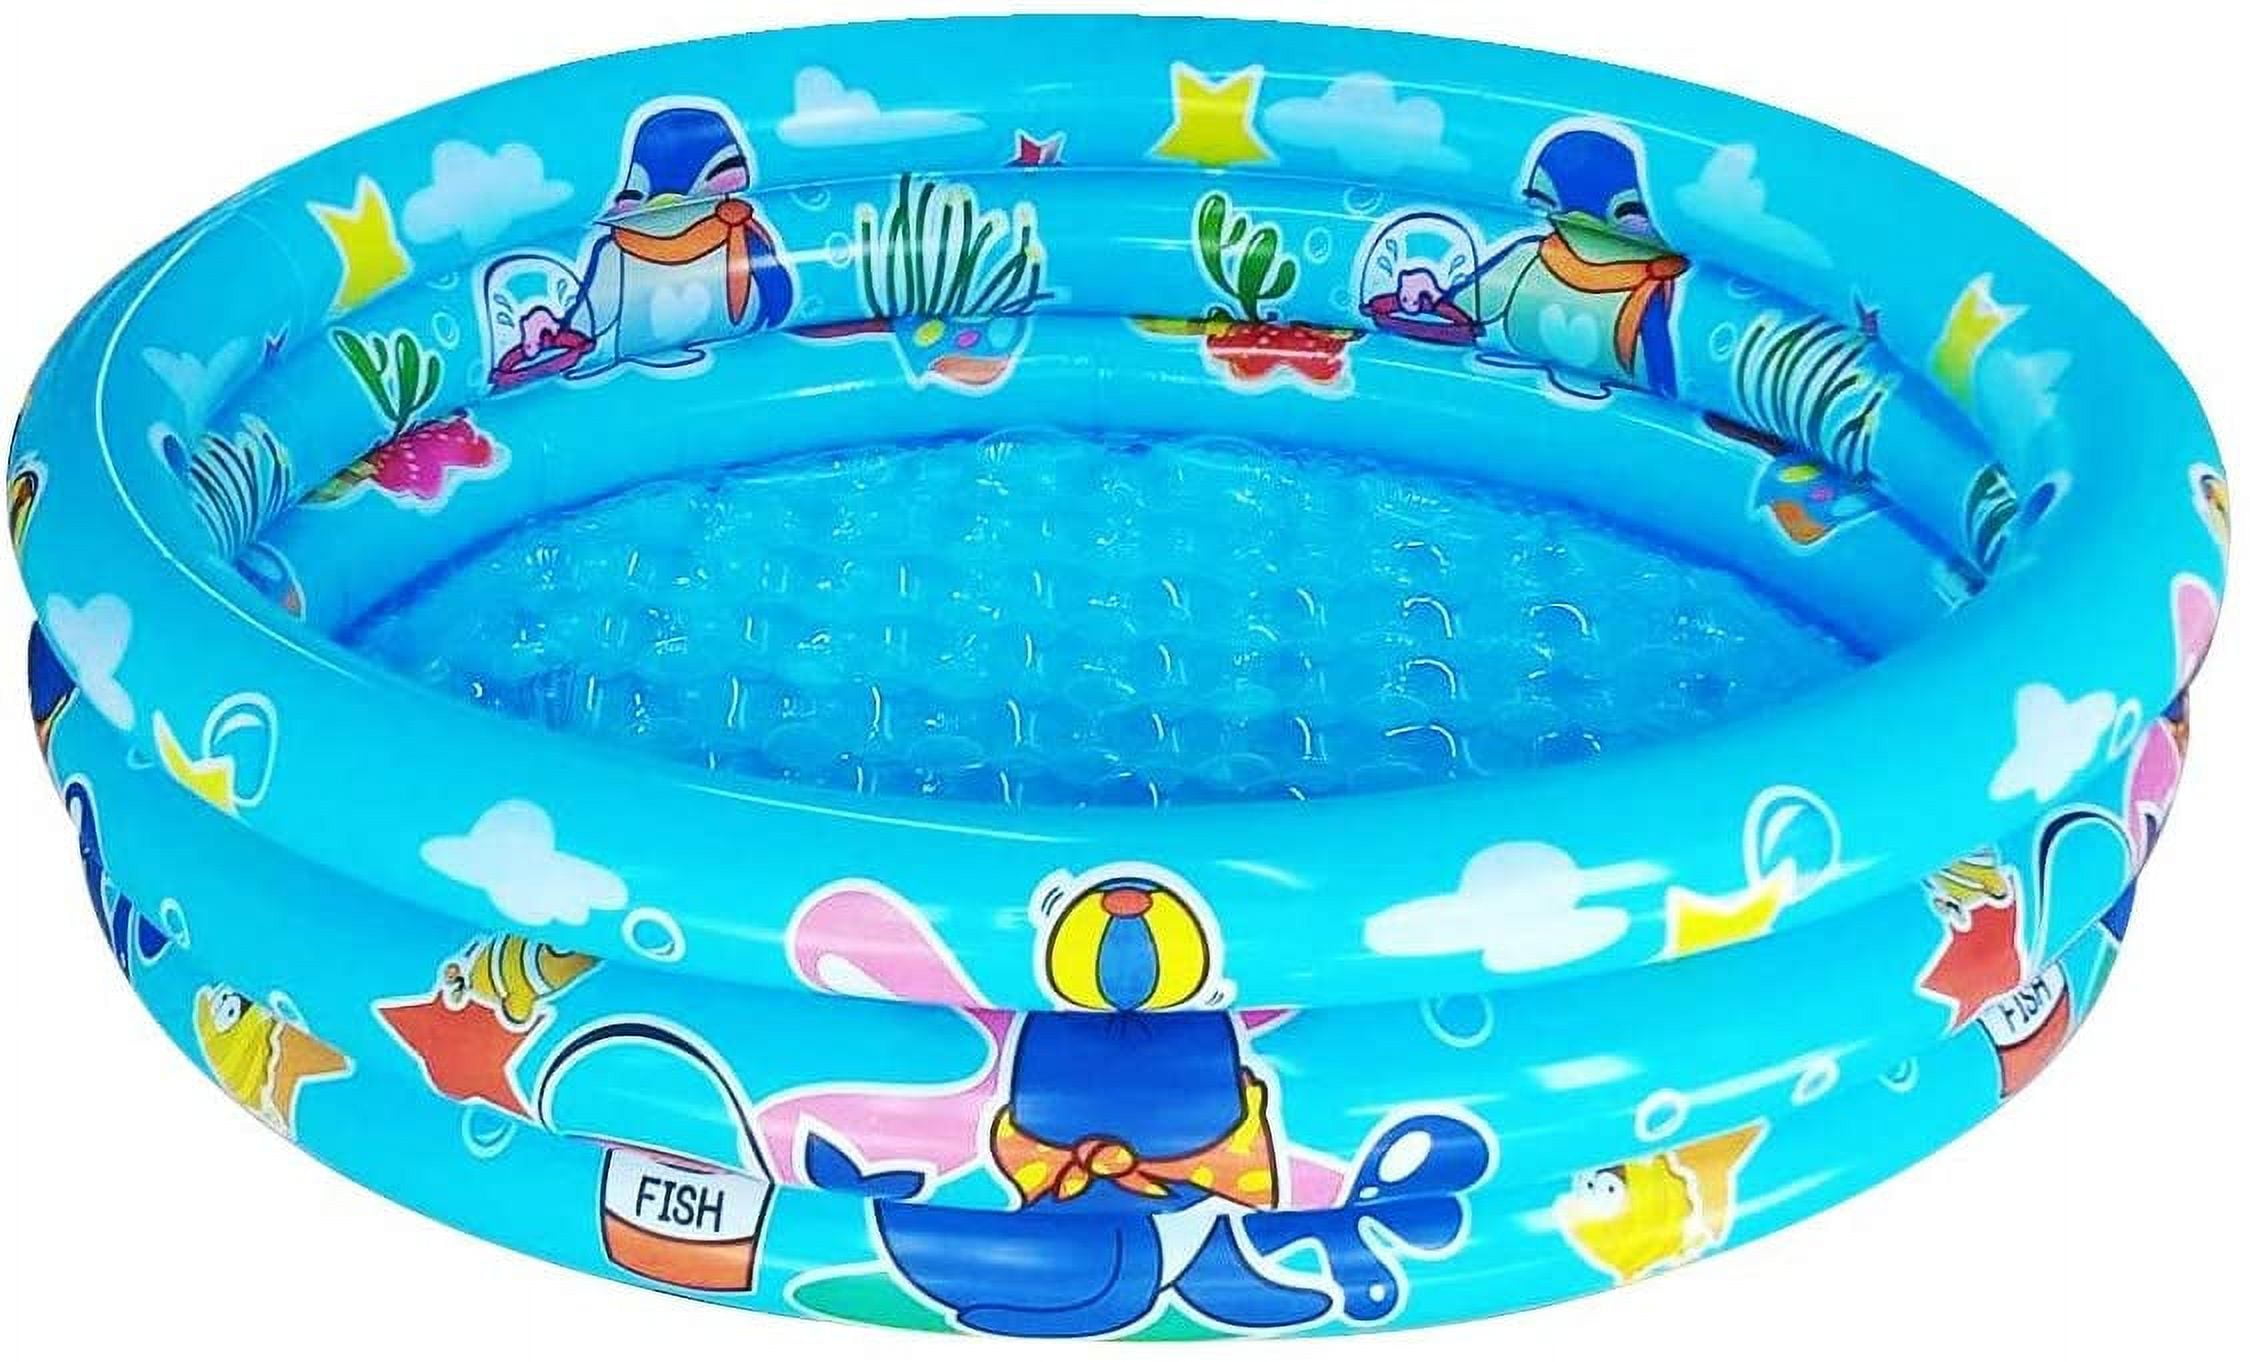 10Leccion Inflatable Kids Pool, Blue Swimming Pool for Toddler, Round Blow  up Ball Pit Pool(48*12)